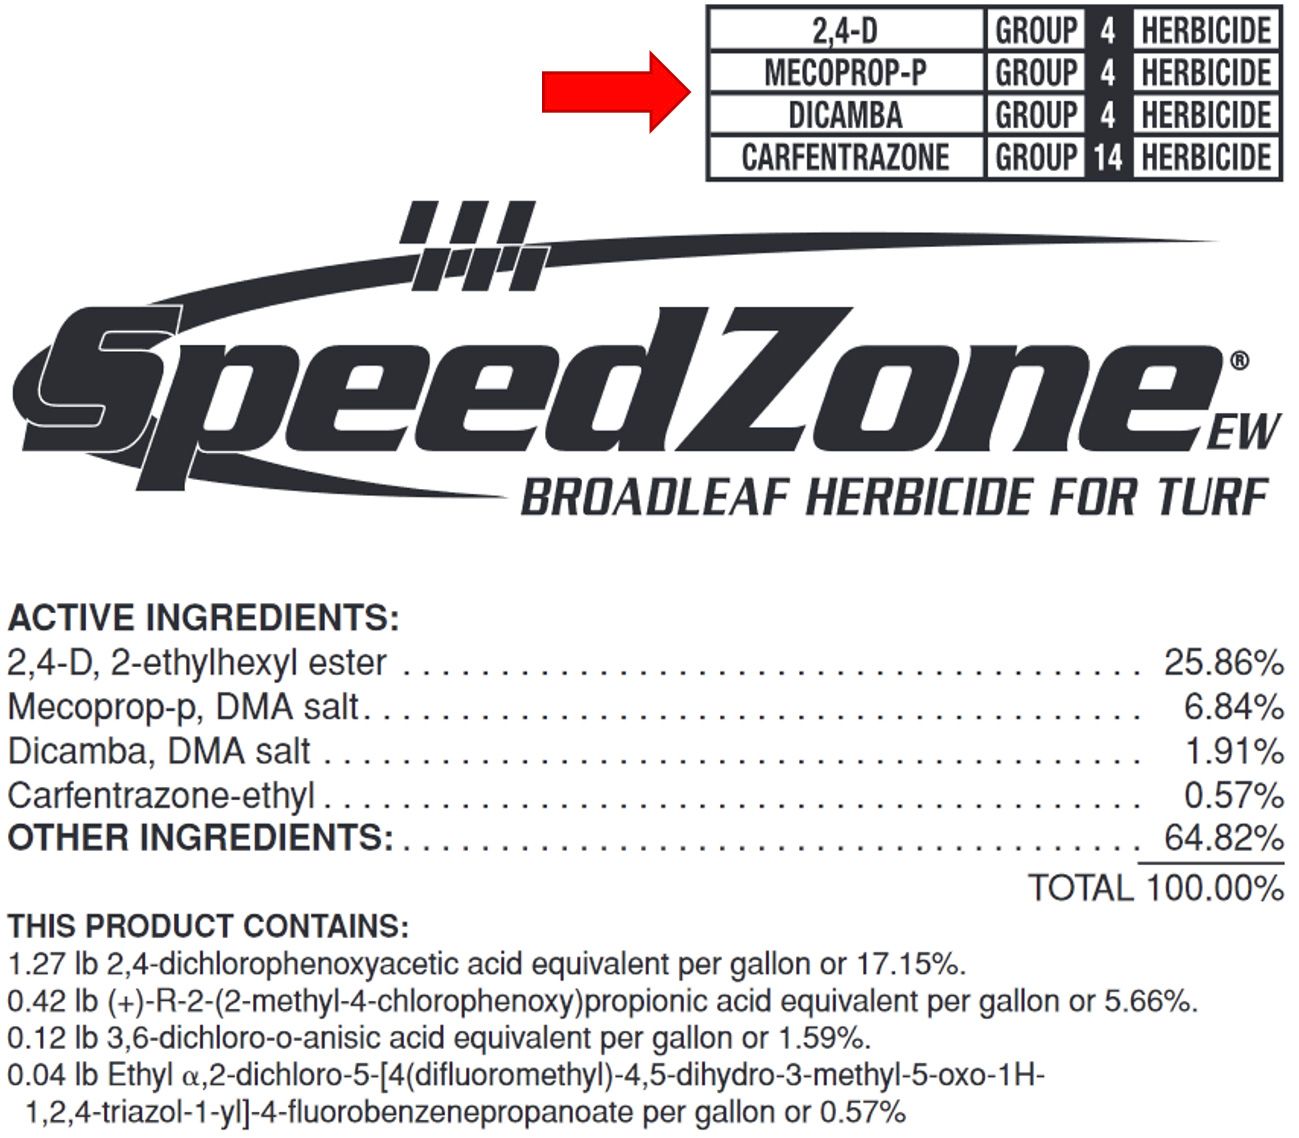 Example of an herbicide product label with an icon indicating the herbicides’ mechanism of action (MoA) classification in Weed Science Society of America (WSSA) and Herbicide Resistance Action Committee (HRAC) harmonized system.